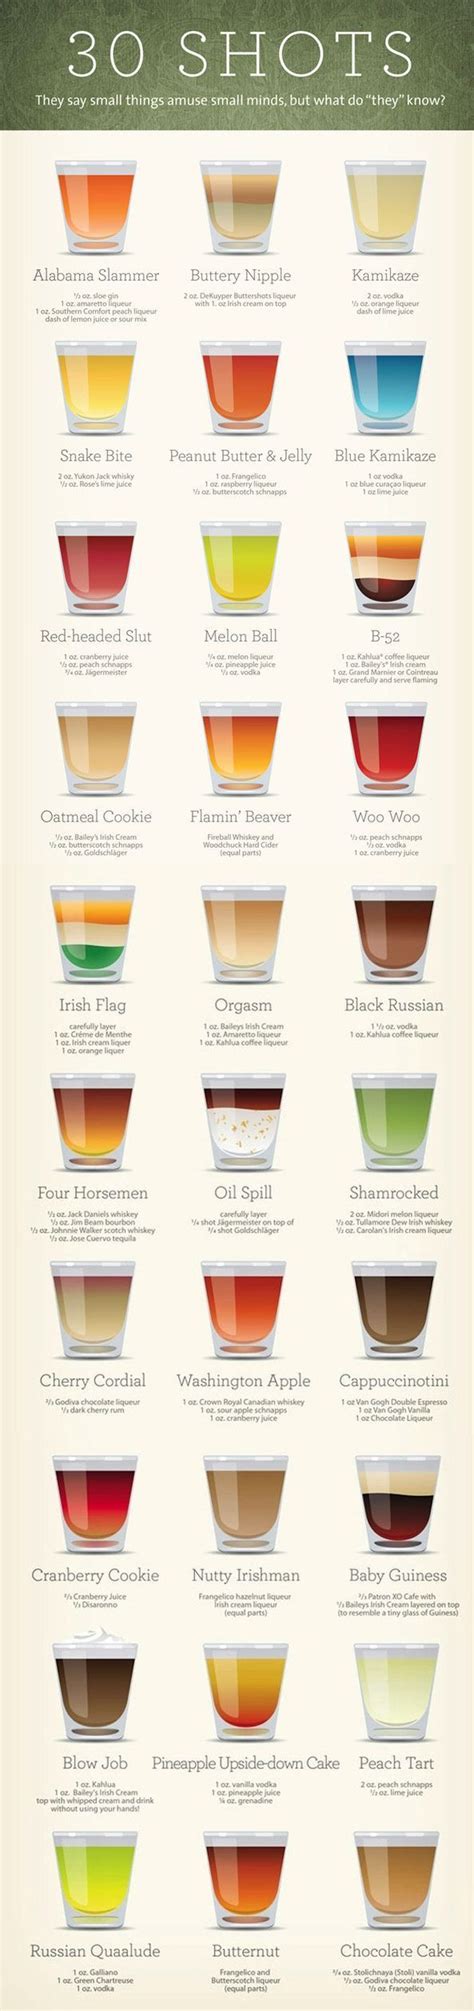 How To Make 30 Different Kinds Of Shots In One Handy Infographic